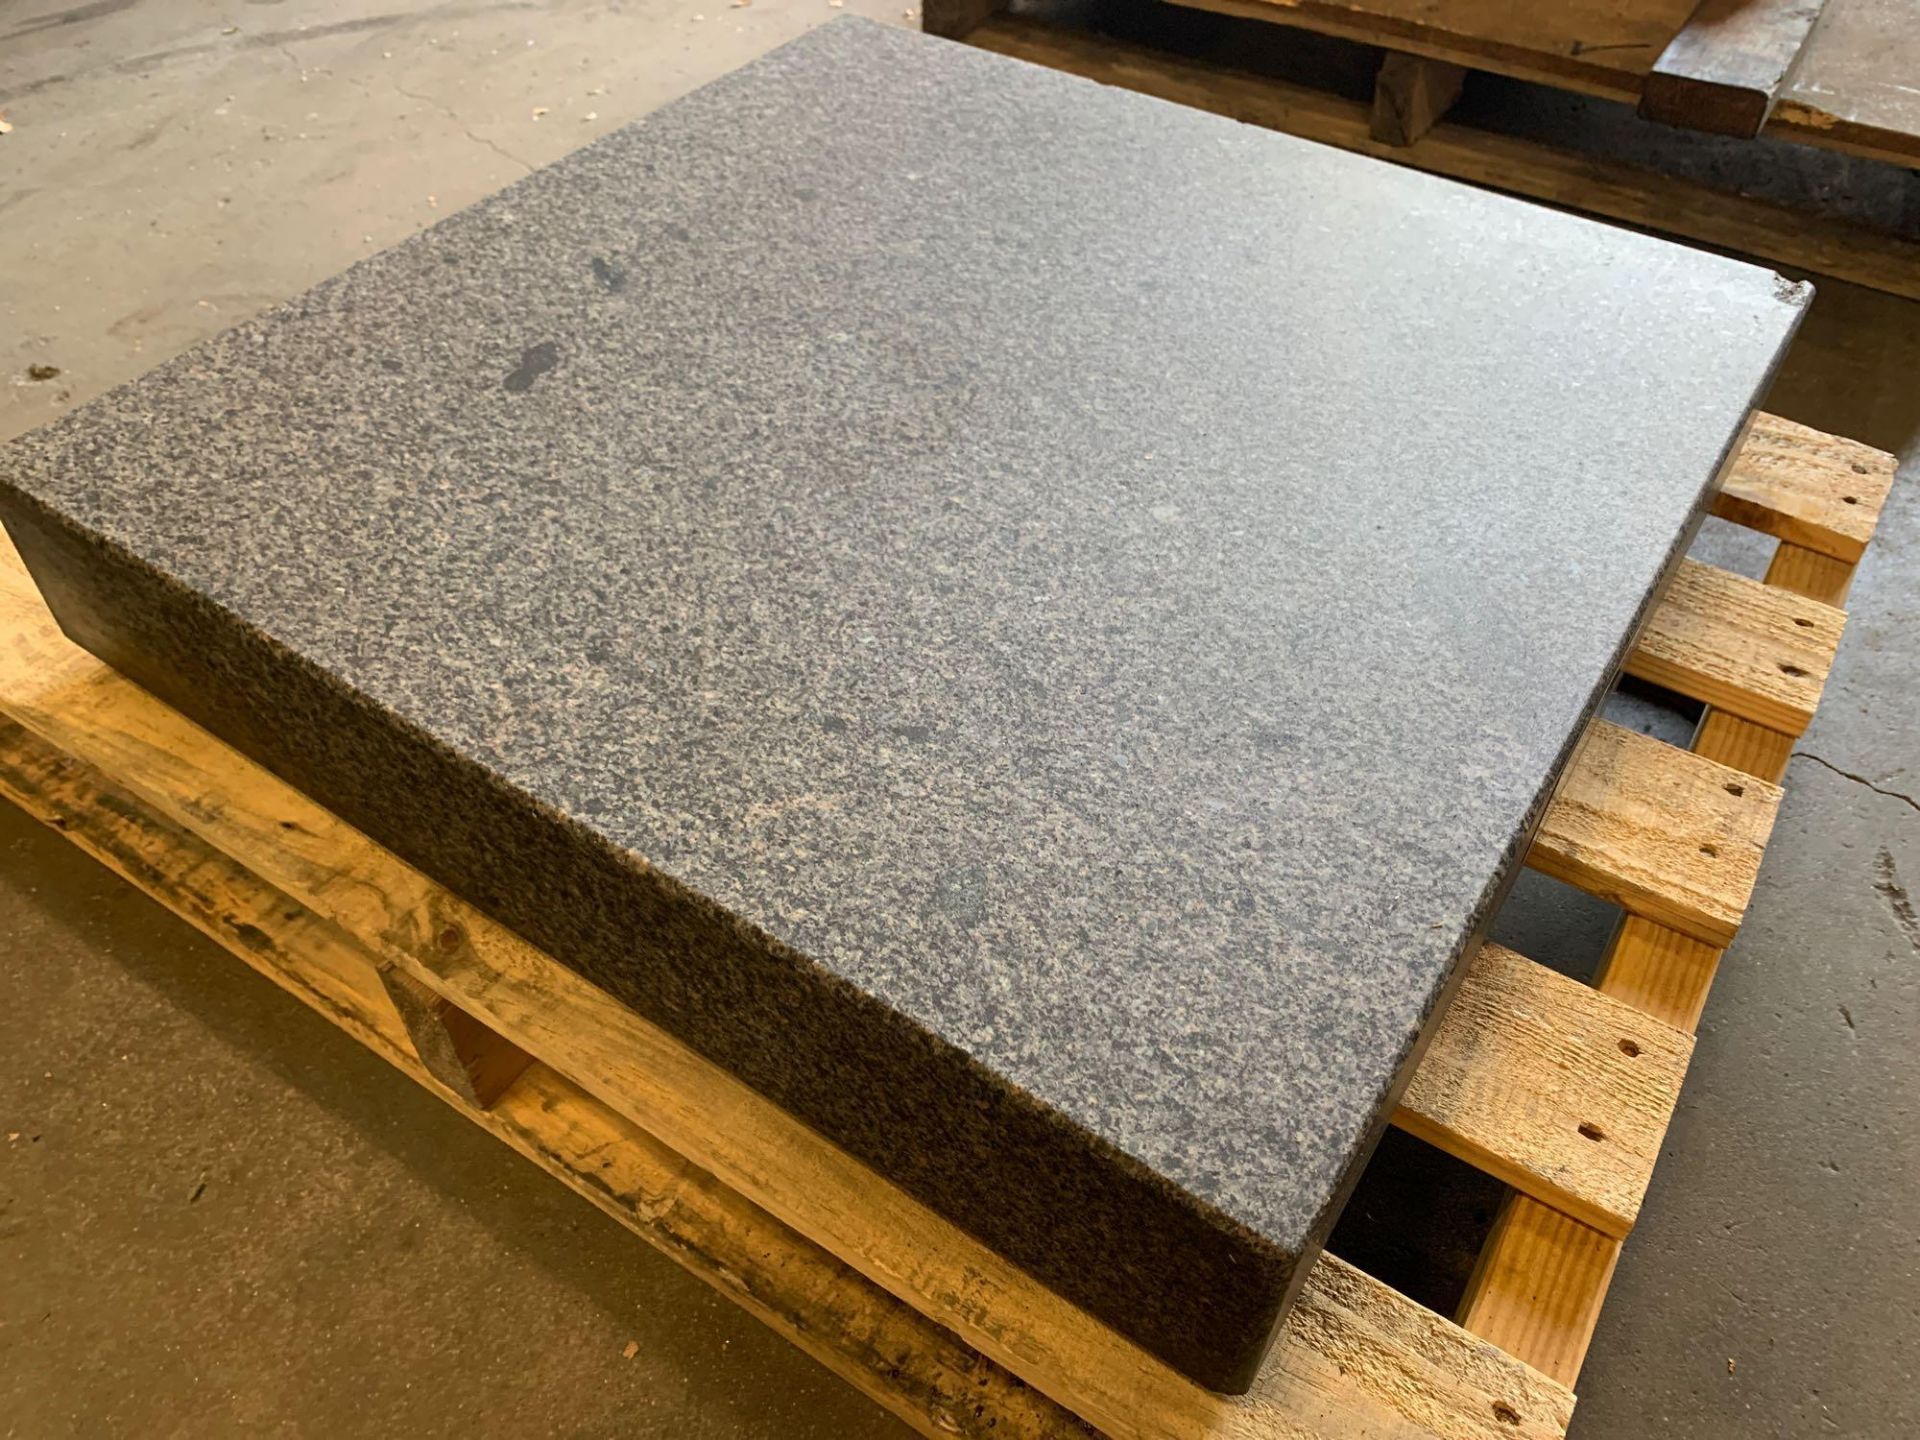 Granite surface plate 24”x24” - Image 2 of 5